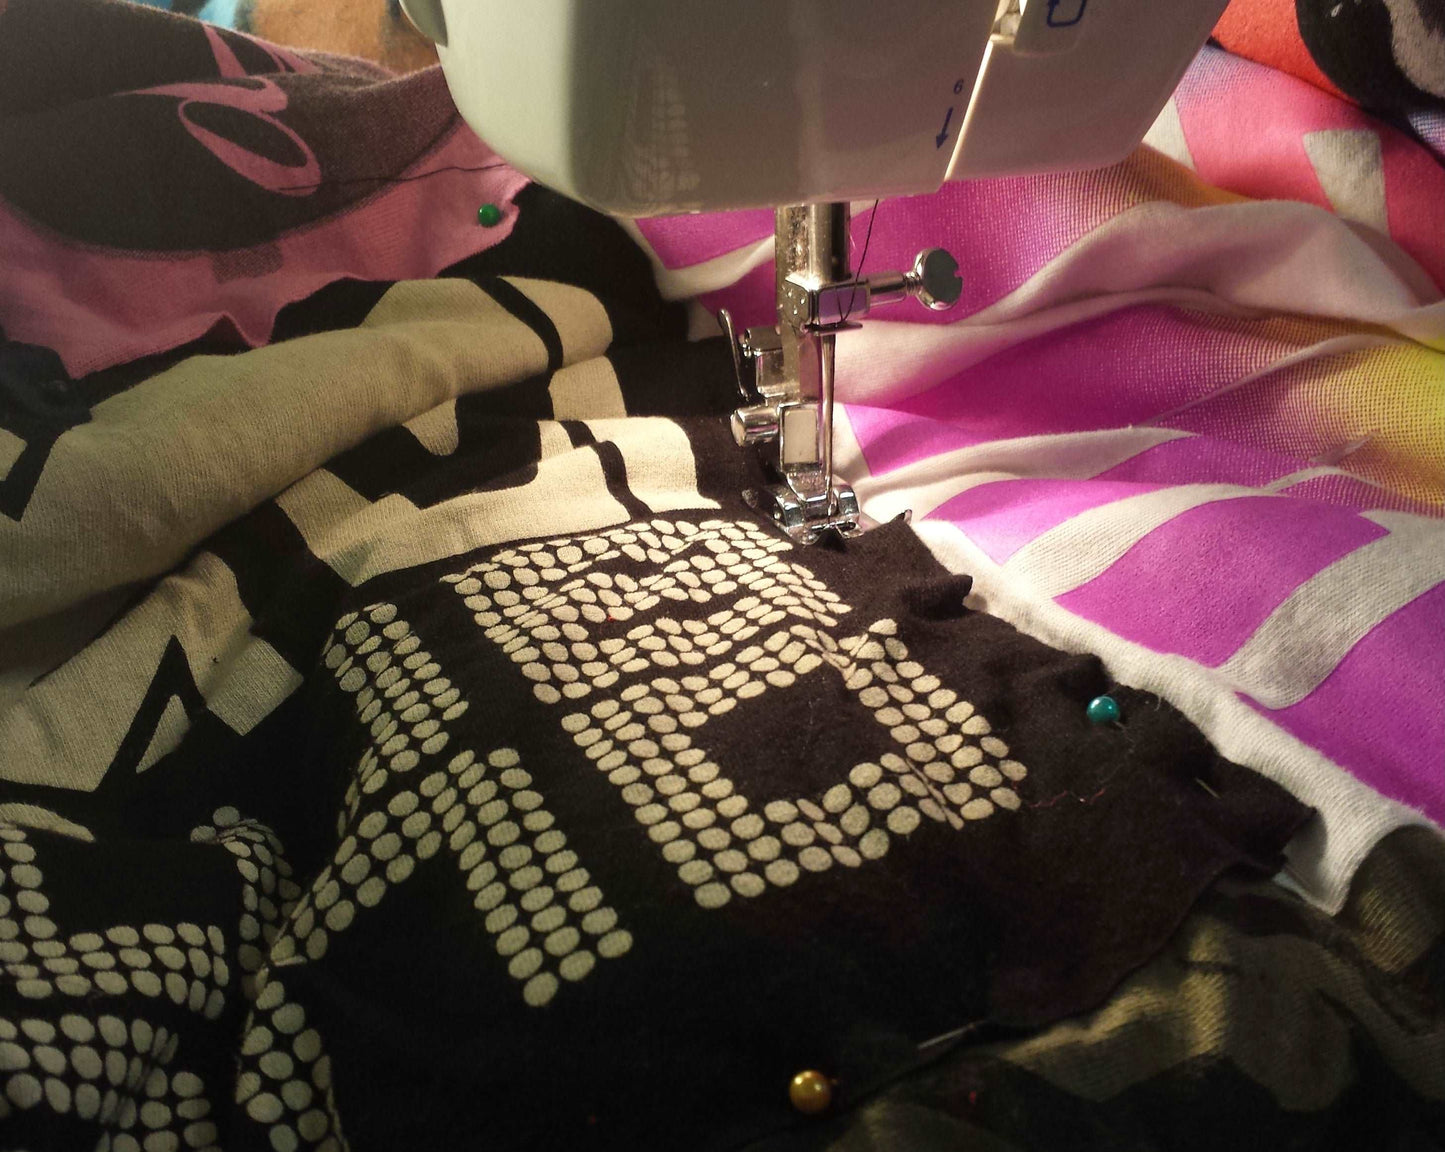 a t shirt quilt, as it is being sewn, under the needle of a sewing machine. there are colorful pins holding the tees in place